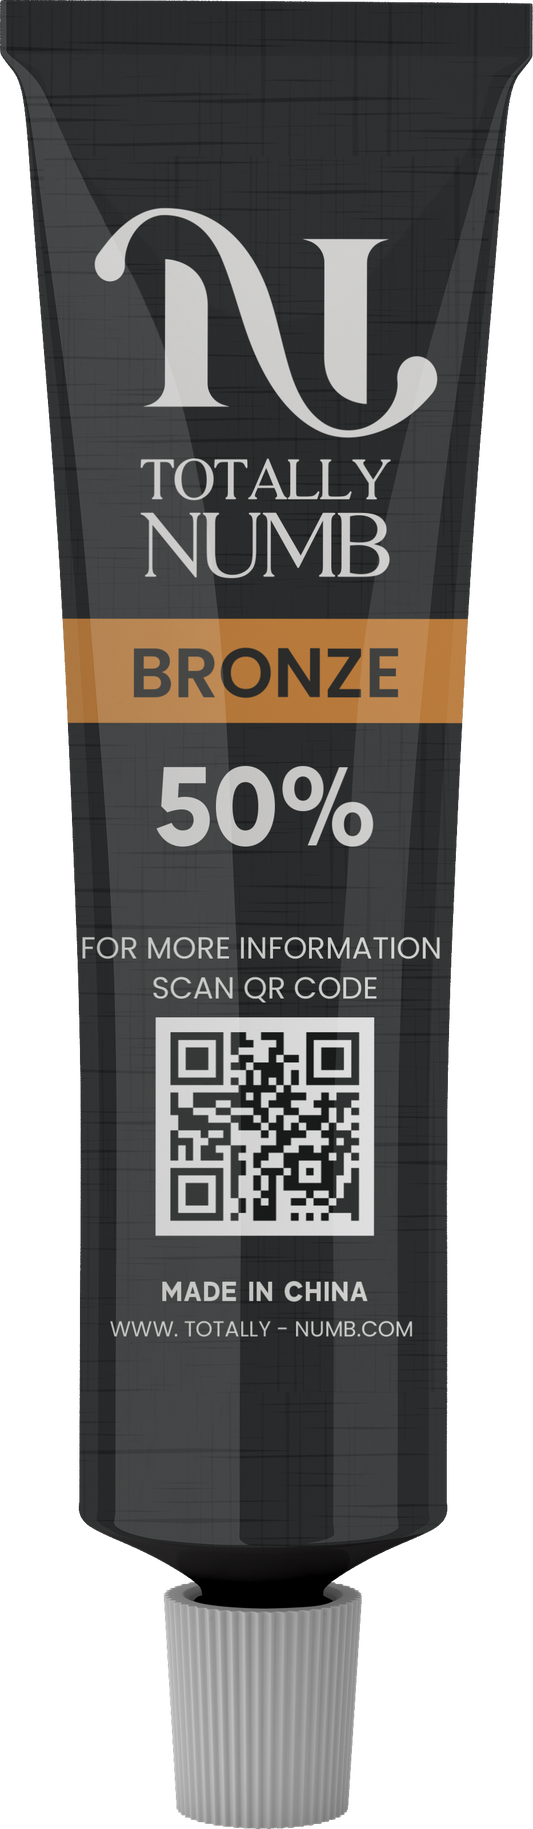 50% BRONZE TOTALLY NUMB - 10g-Totally Numb-Numb-Me.co